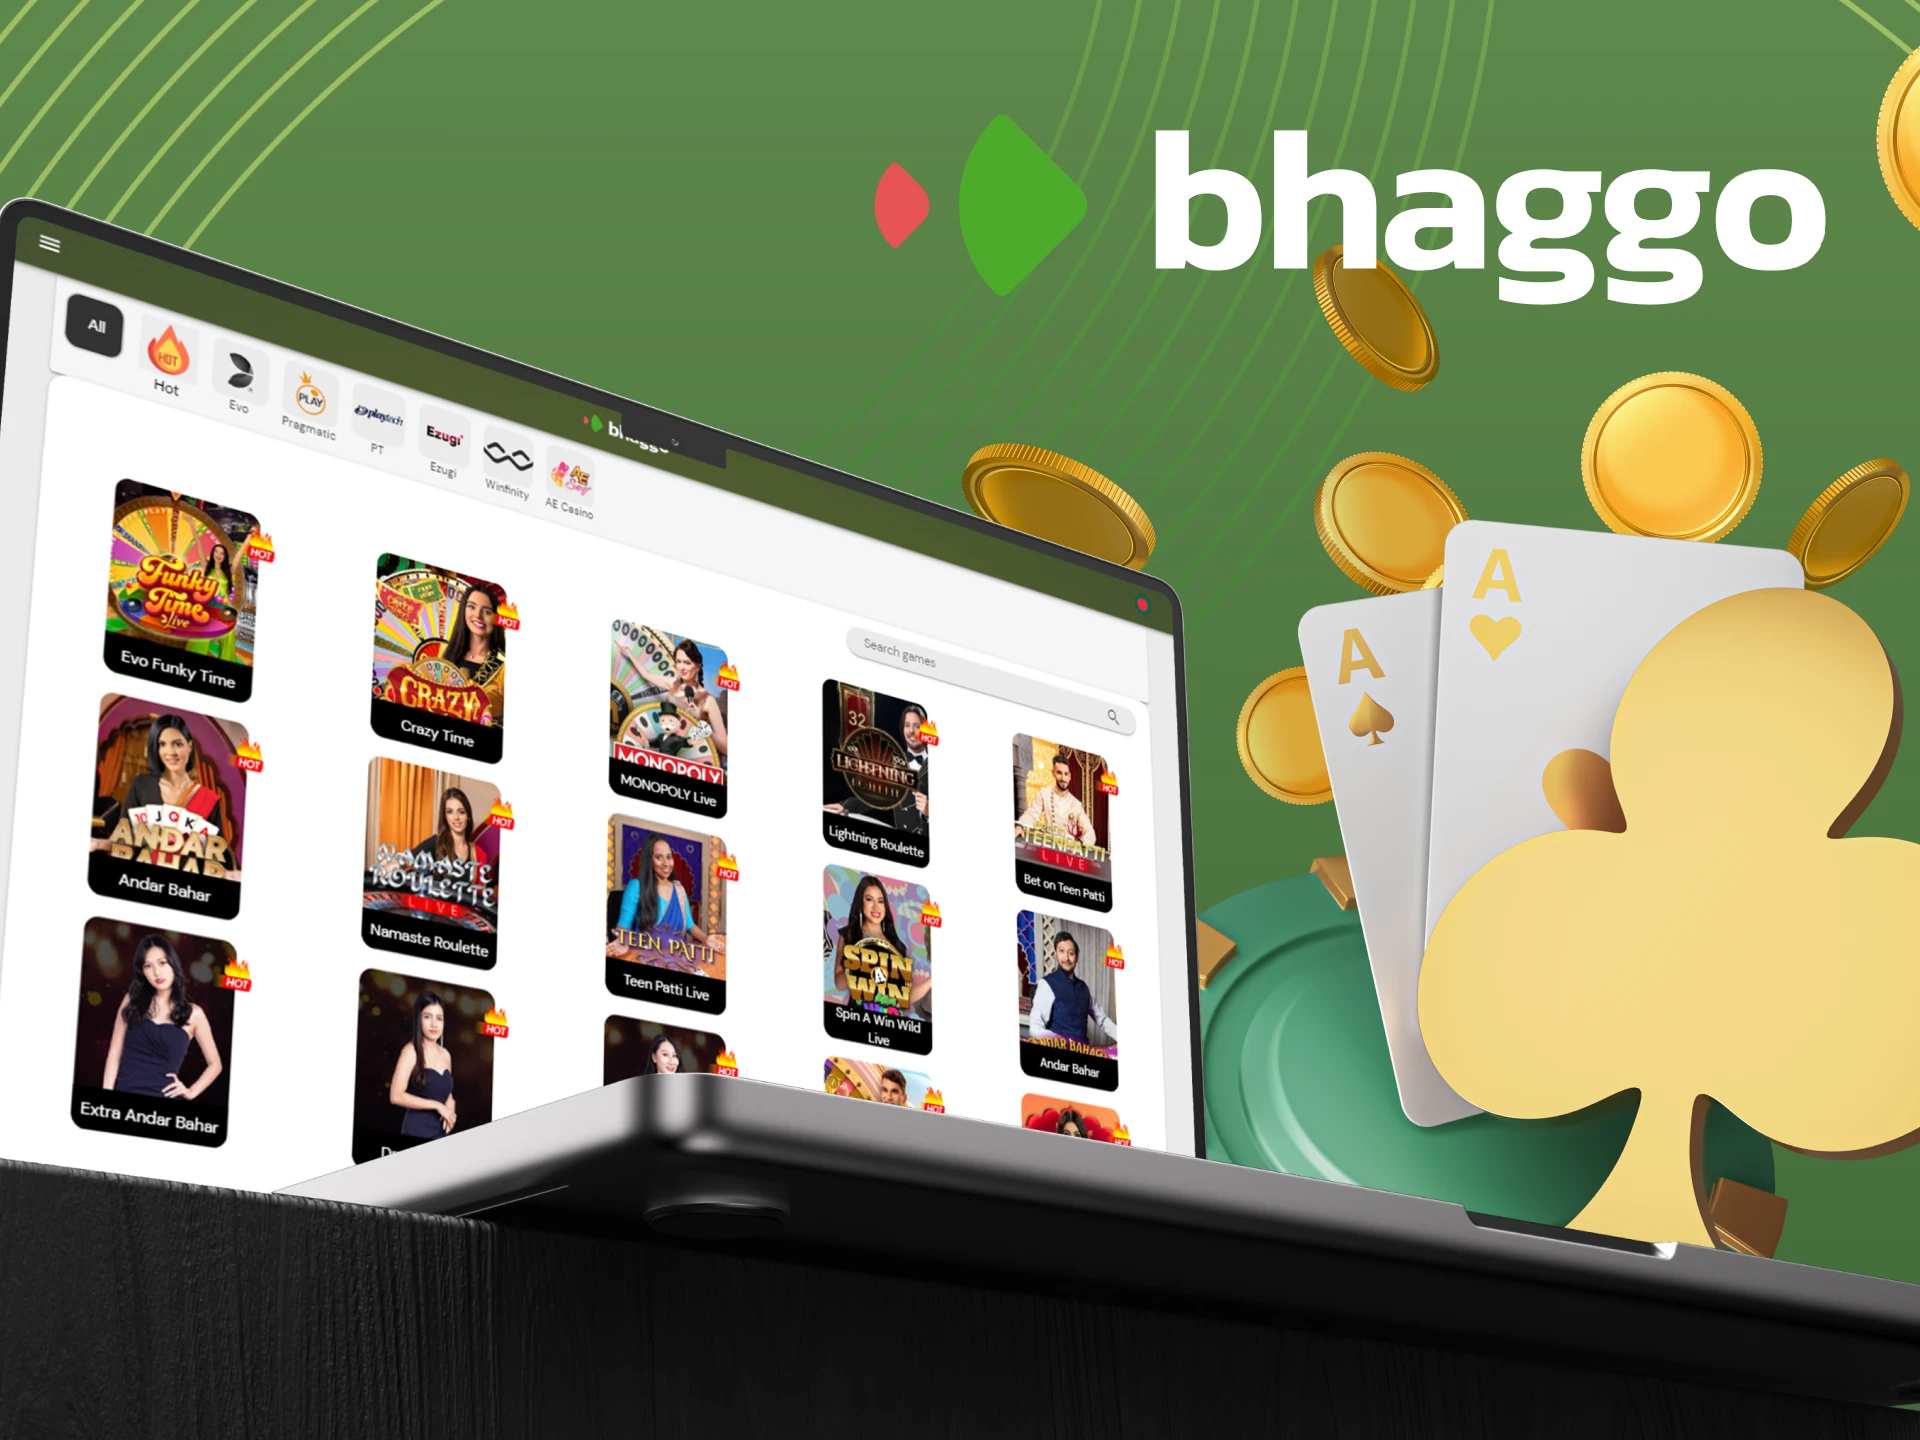 What games are there in the live casino section at Bhaggo online casino.